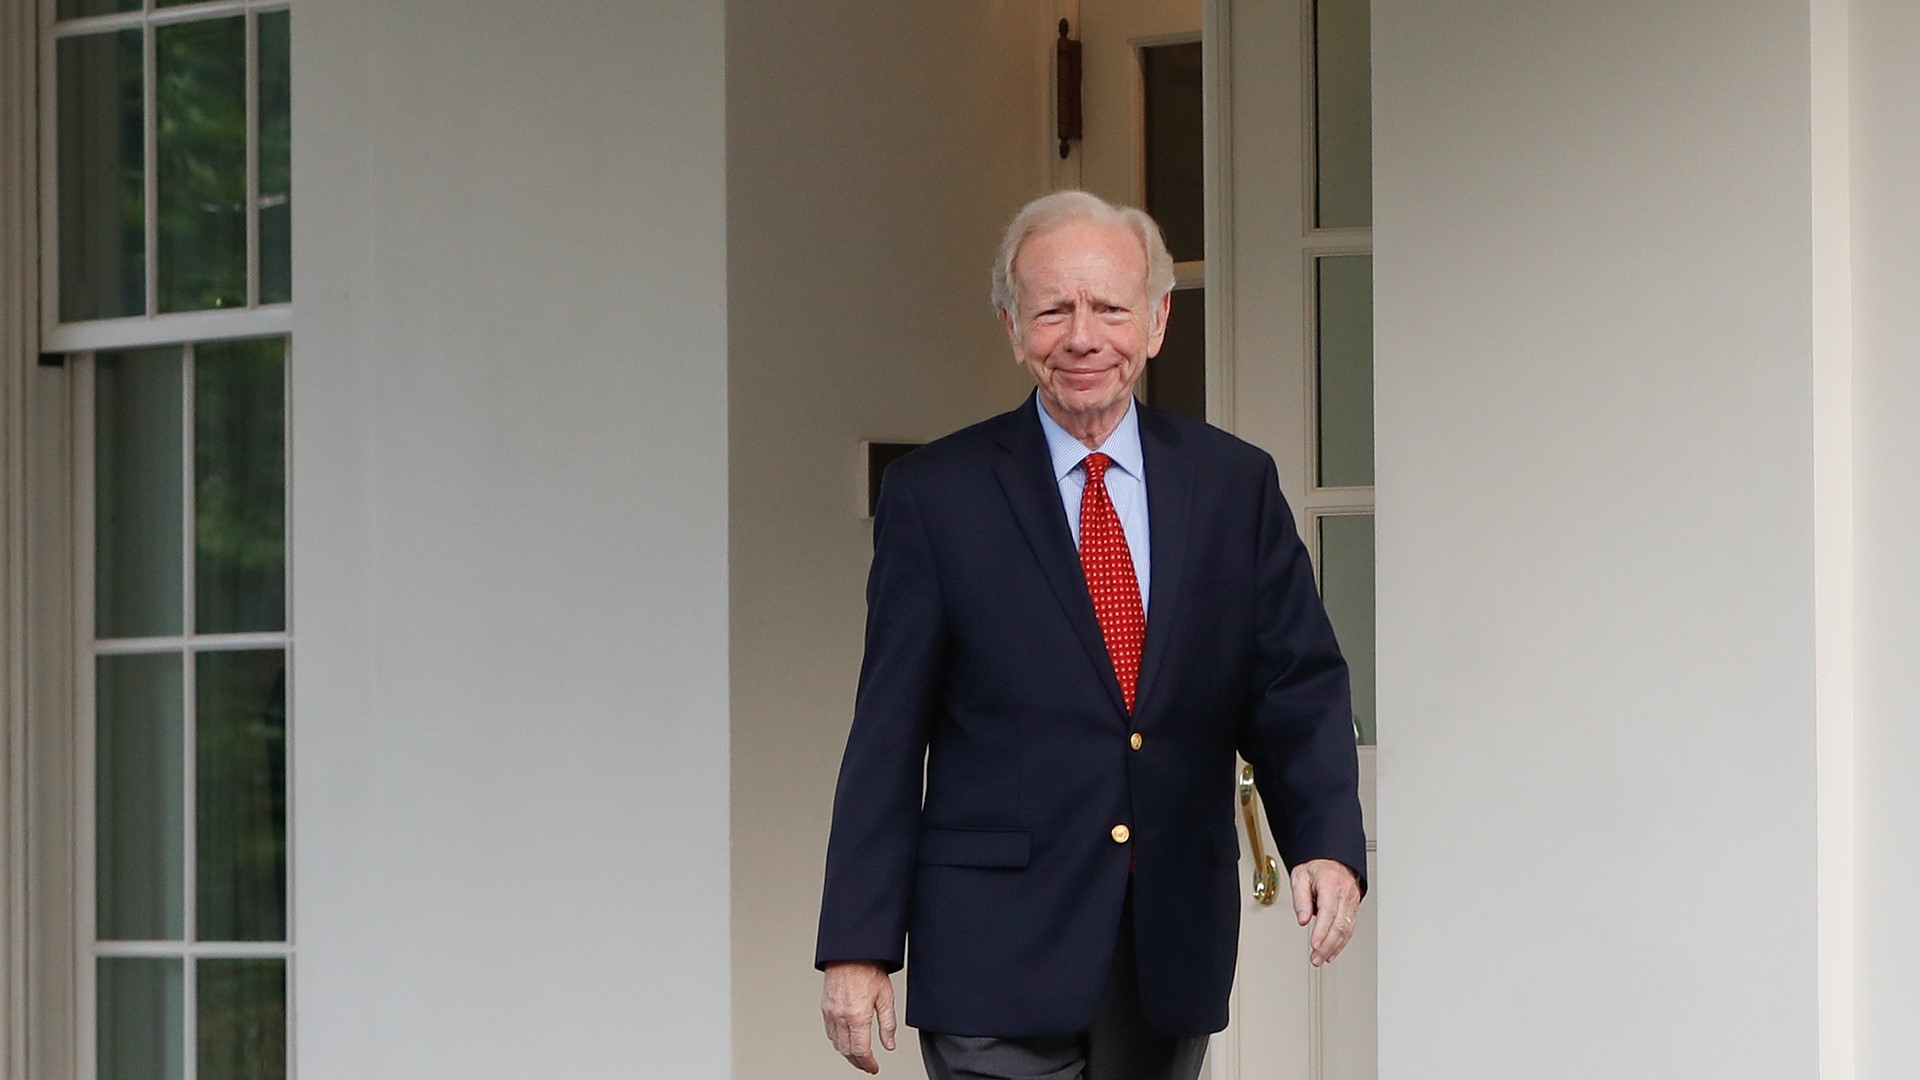 Former U.S. Sen. Joe Lieberman of Connecticut has died at 82, according to a statement issued by his family.